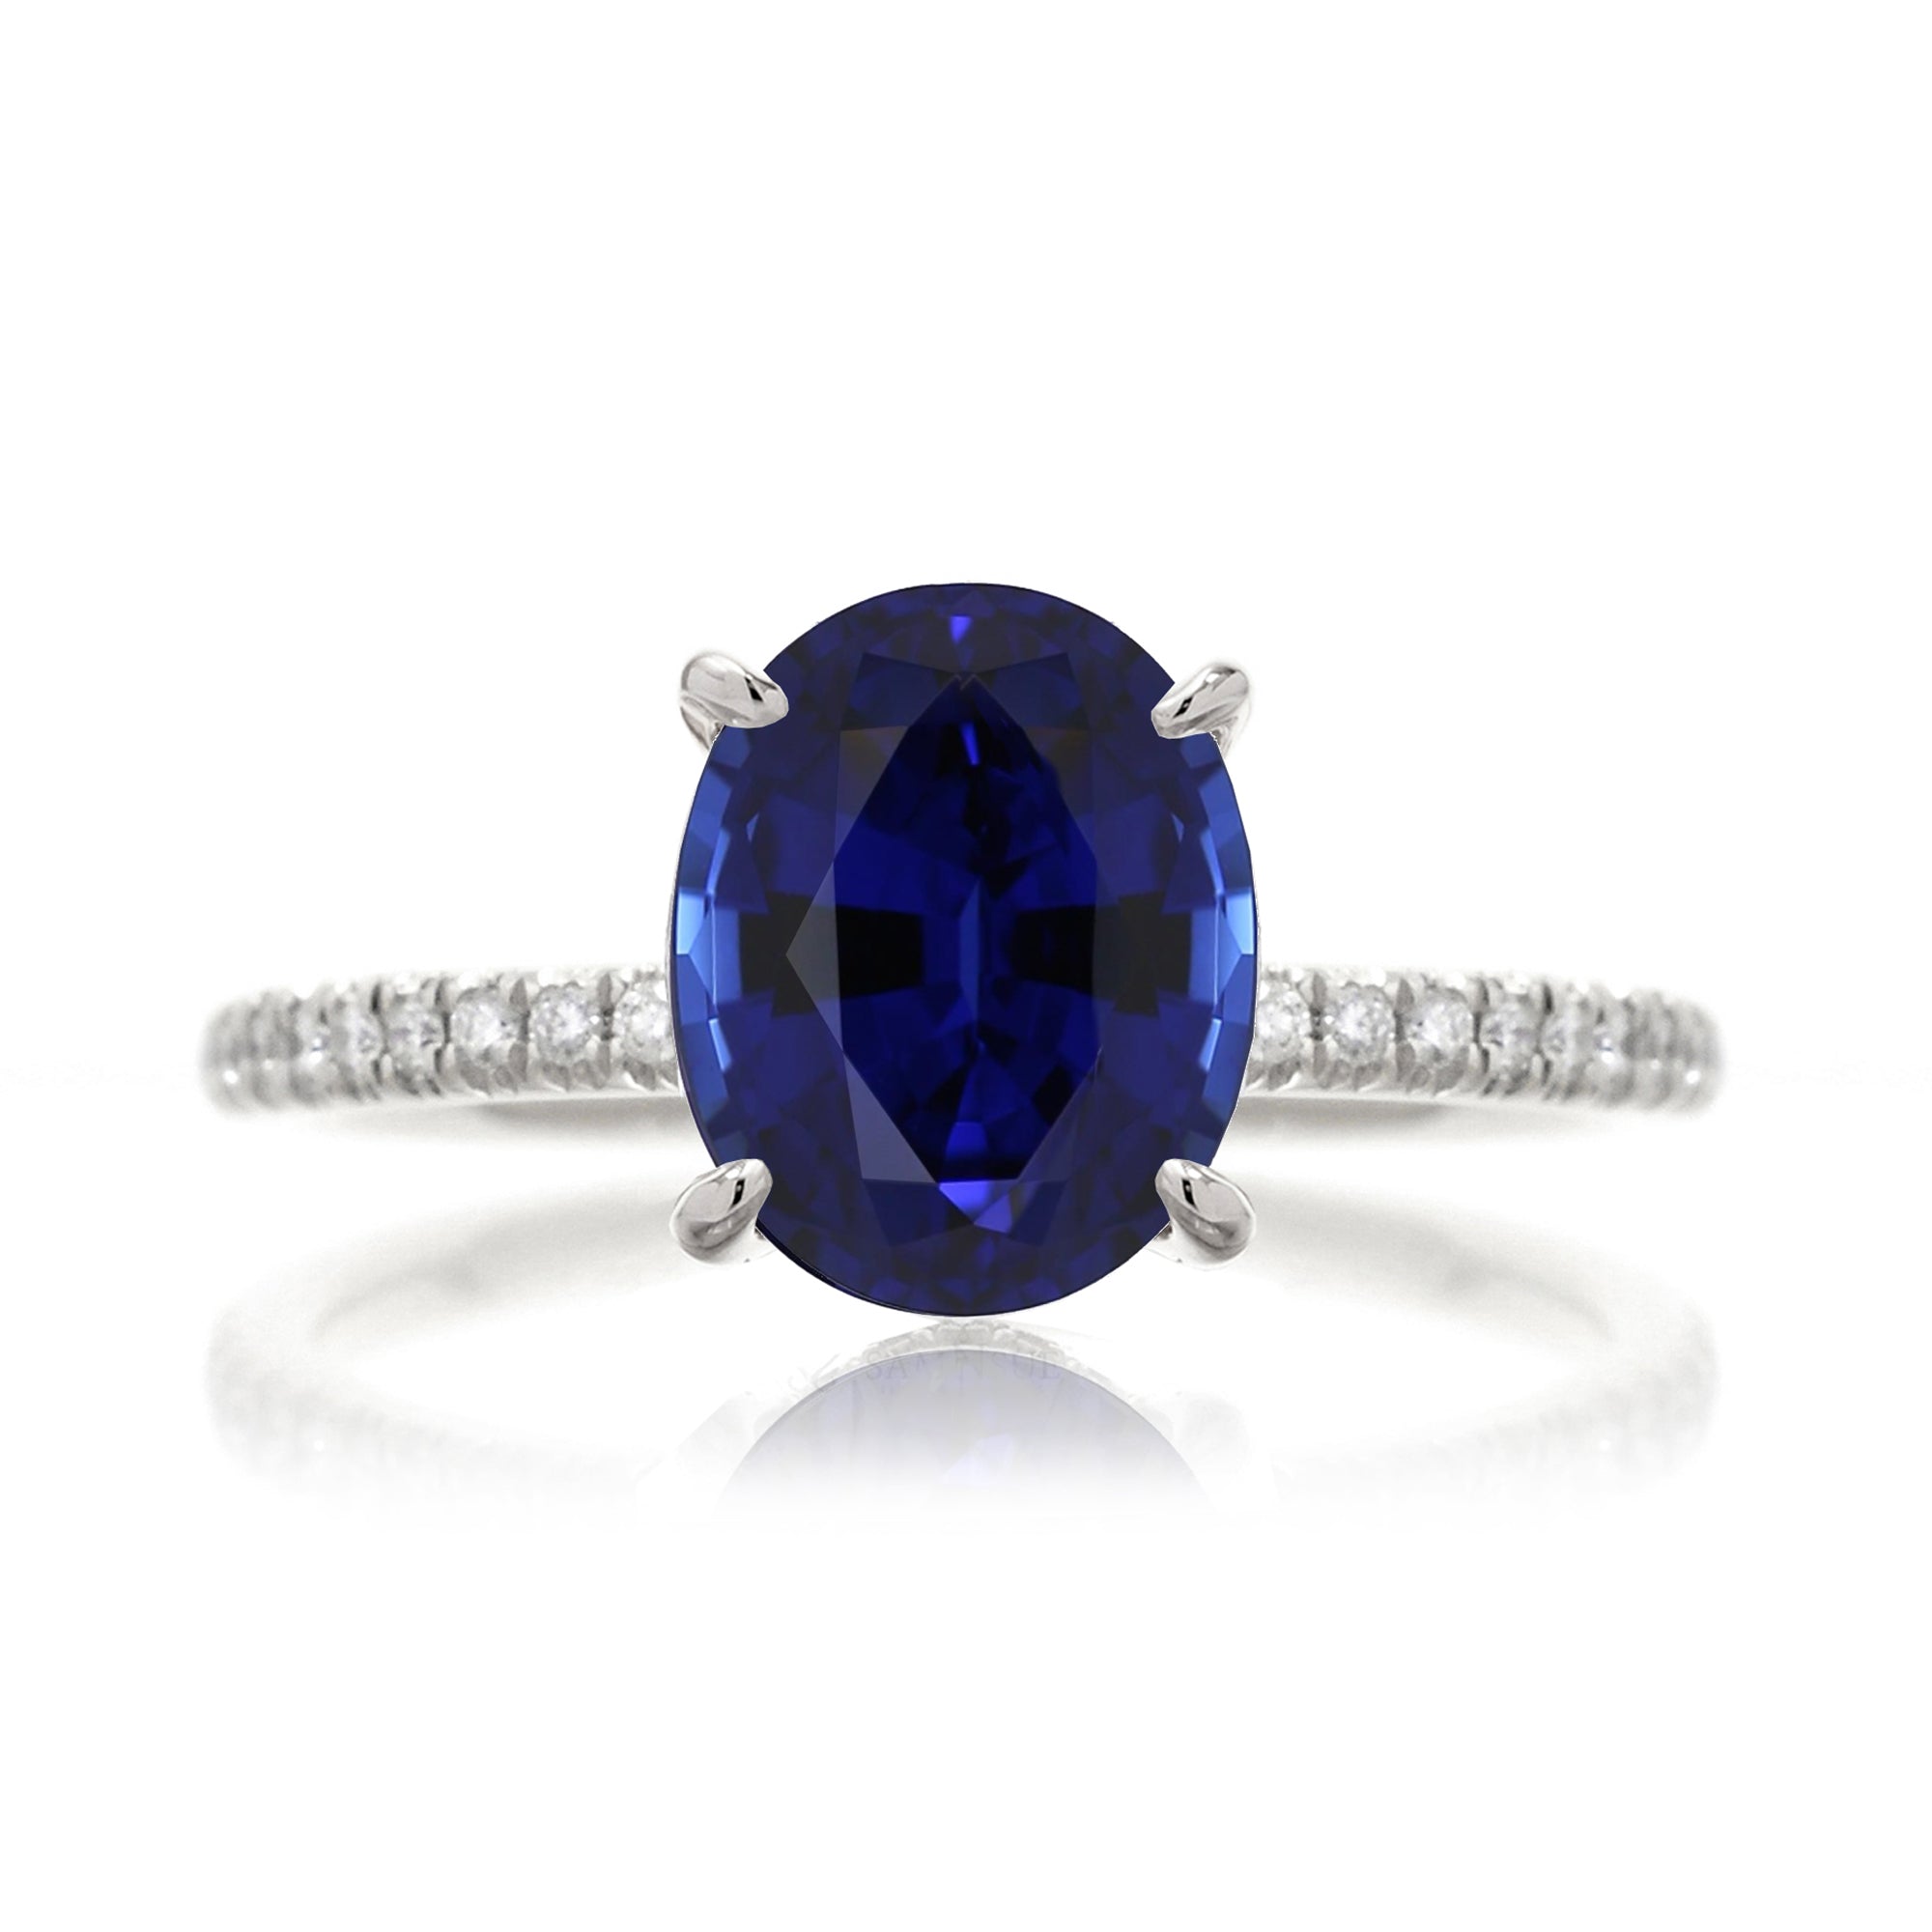 Oval blue sapphire diamond band engagement ring white gold - the Ava